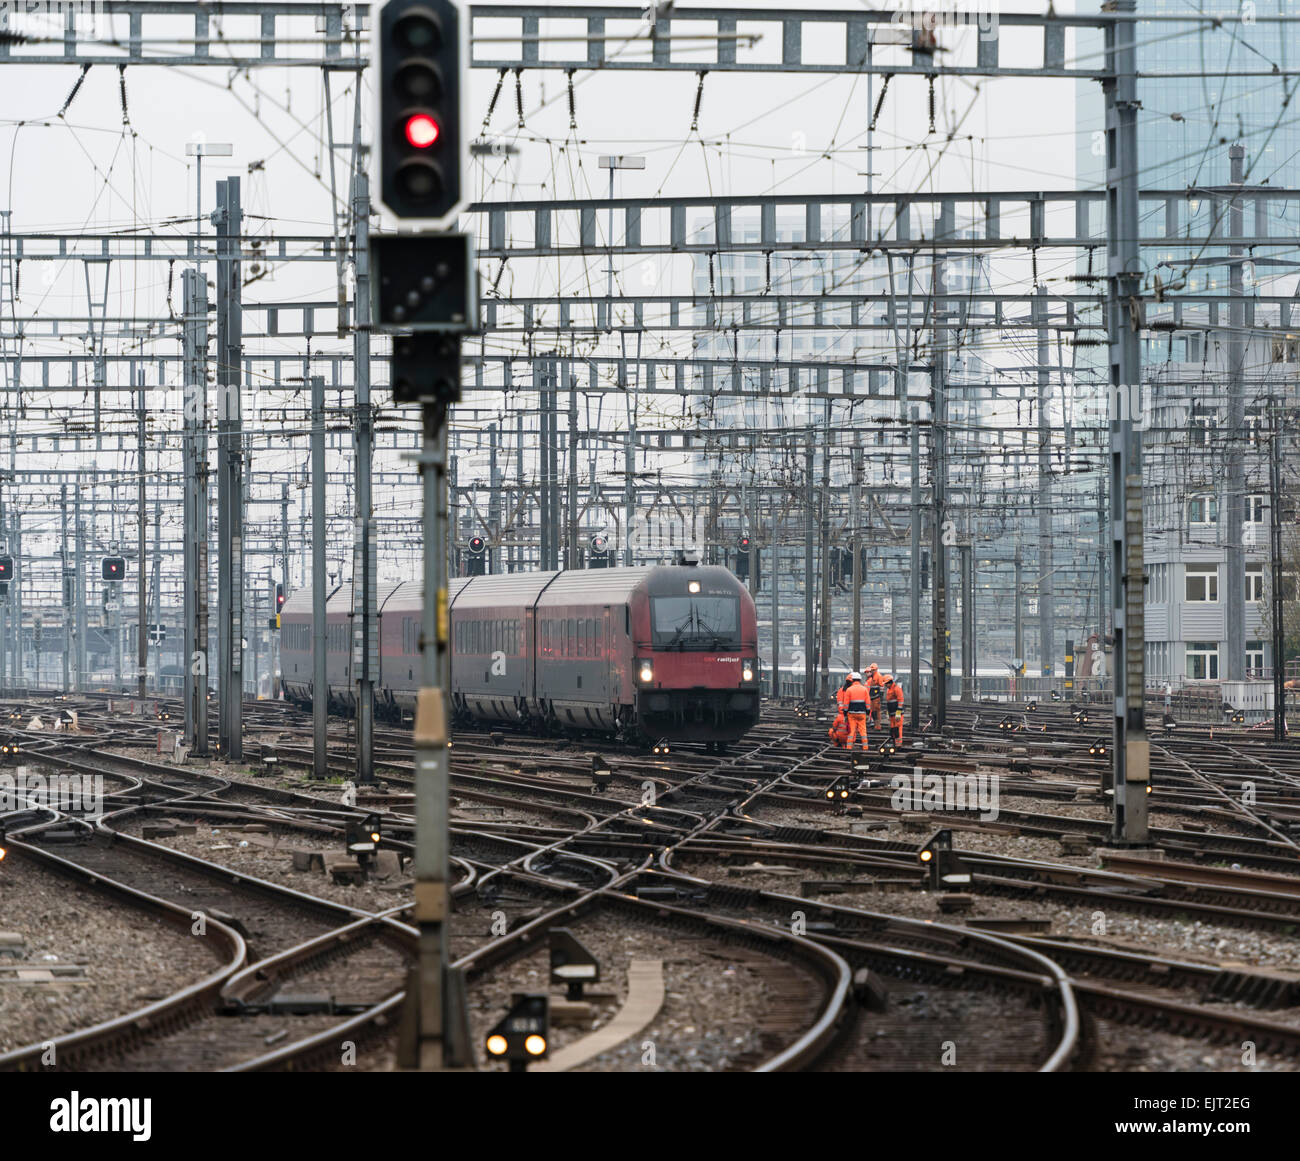 Railway workers and a train on the railway track field of Zurich main station, one of Europe's busiest railway stations. Stock Photo